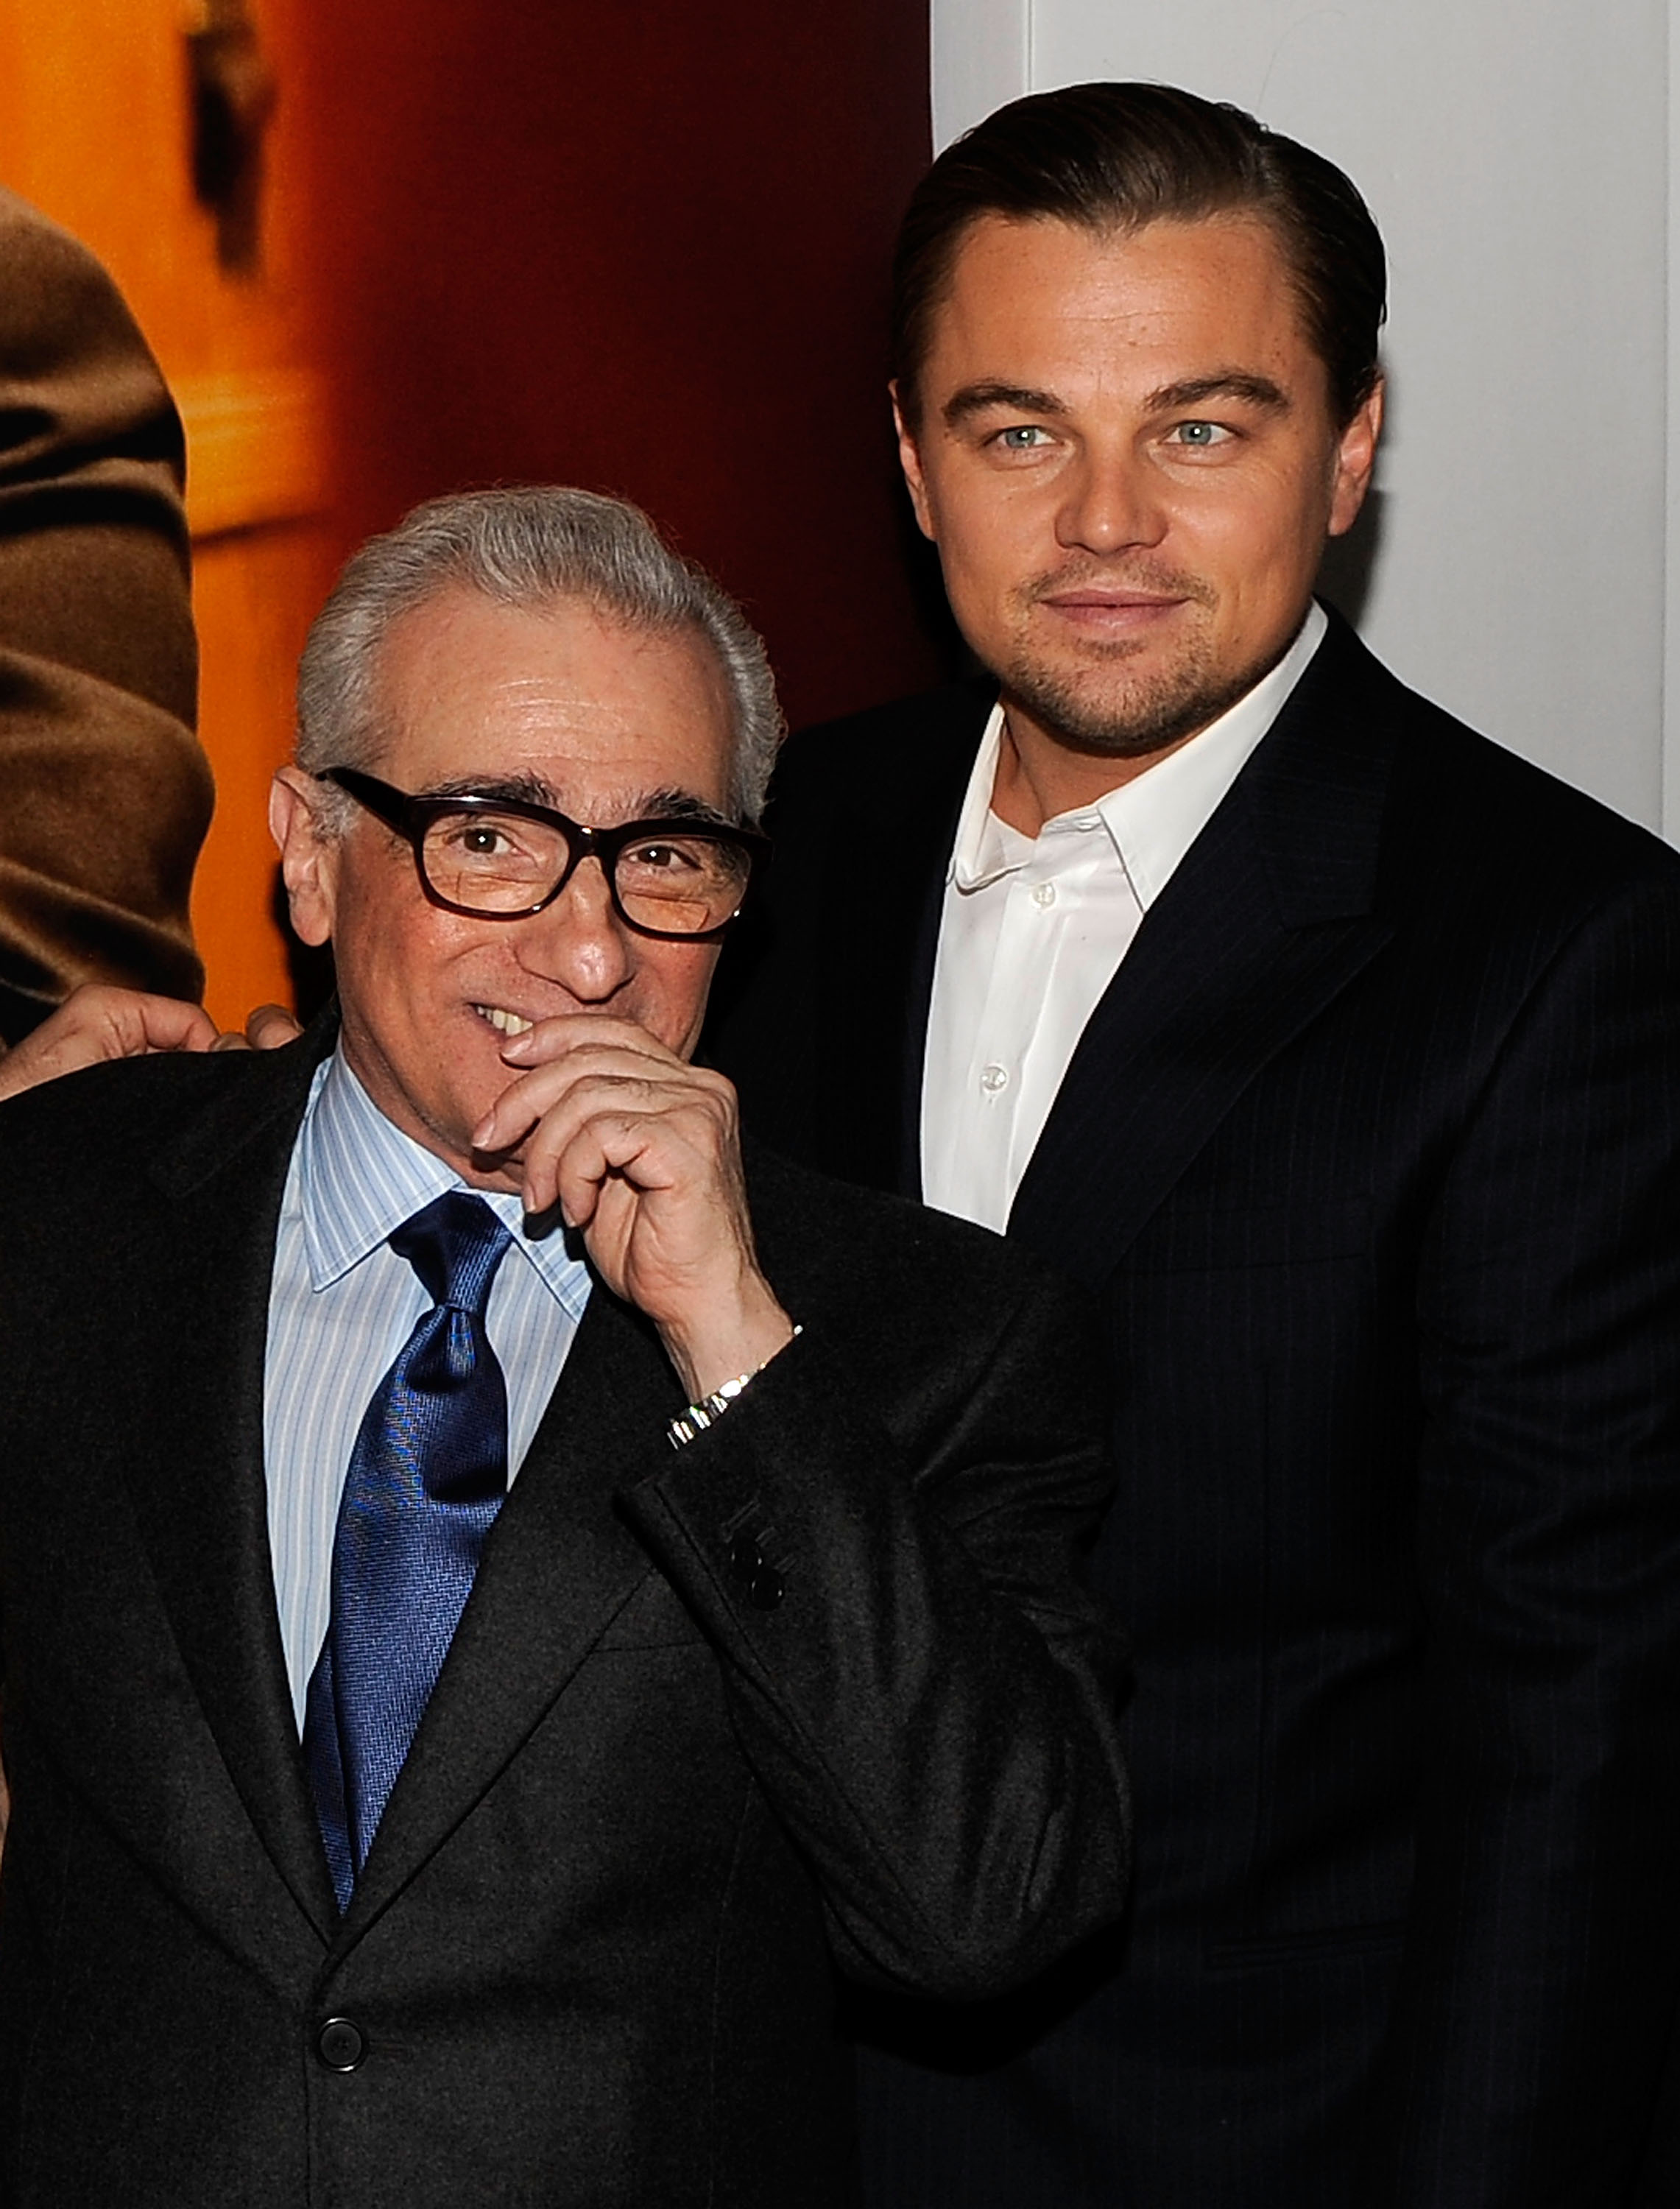 NEW YORK - FEBRUARY 16: Director Martin Scorsese and actor Leonardo DiCaprio attend the cocktail party to celebrate the New York premiere of "Shutter Island" at Armani Ristorante on February 16, 2010 in New York City. (Photo by Larry Busacca/Getty Images for Giorgio Armani)